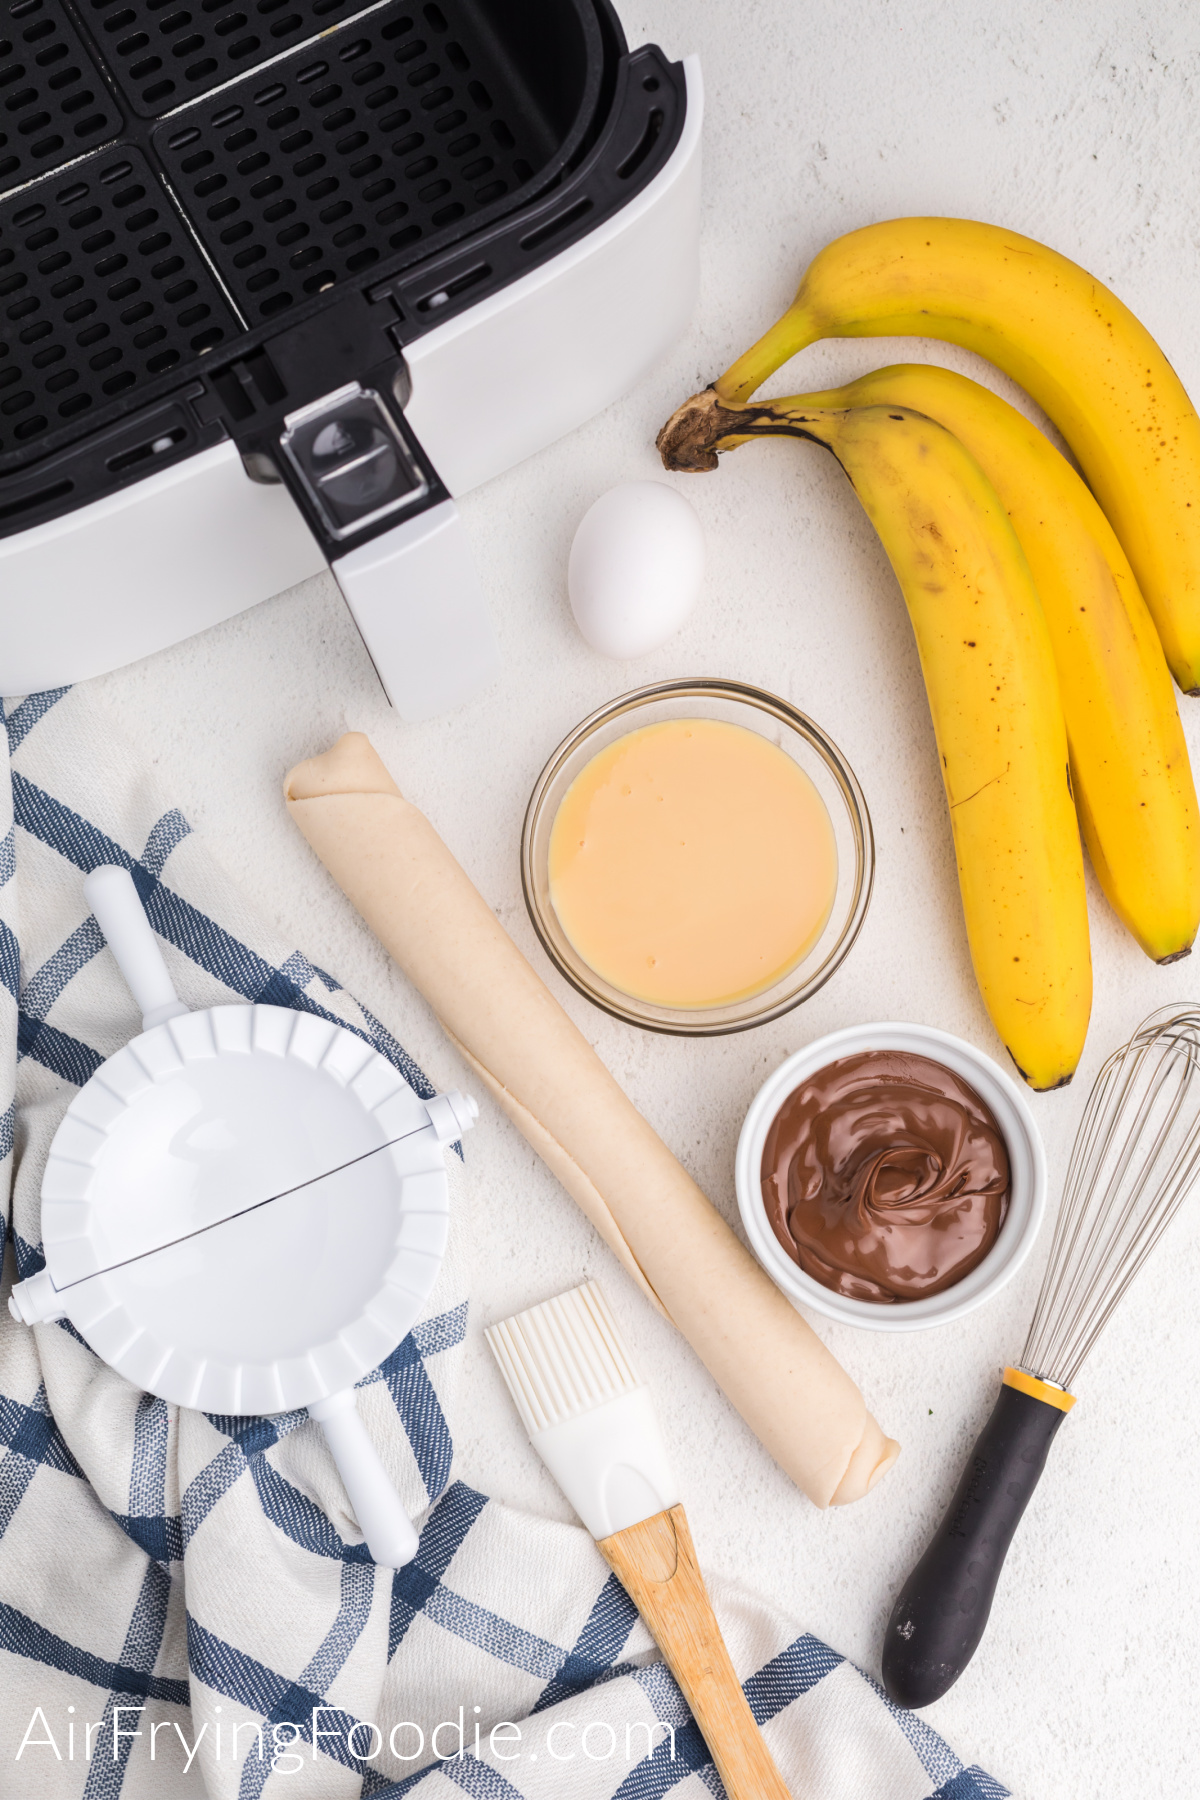 Table with ingredients and items needed to make banana nutella hand pies in the air fryer.